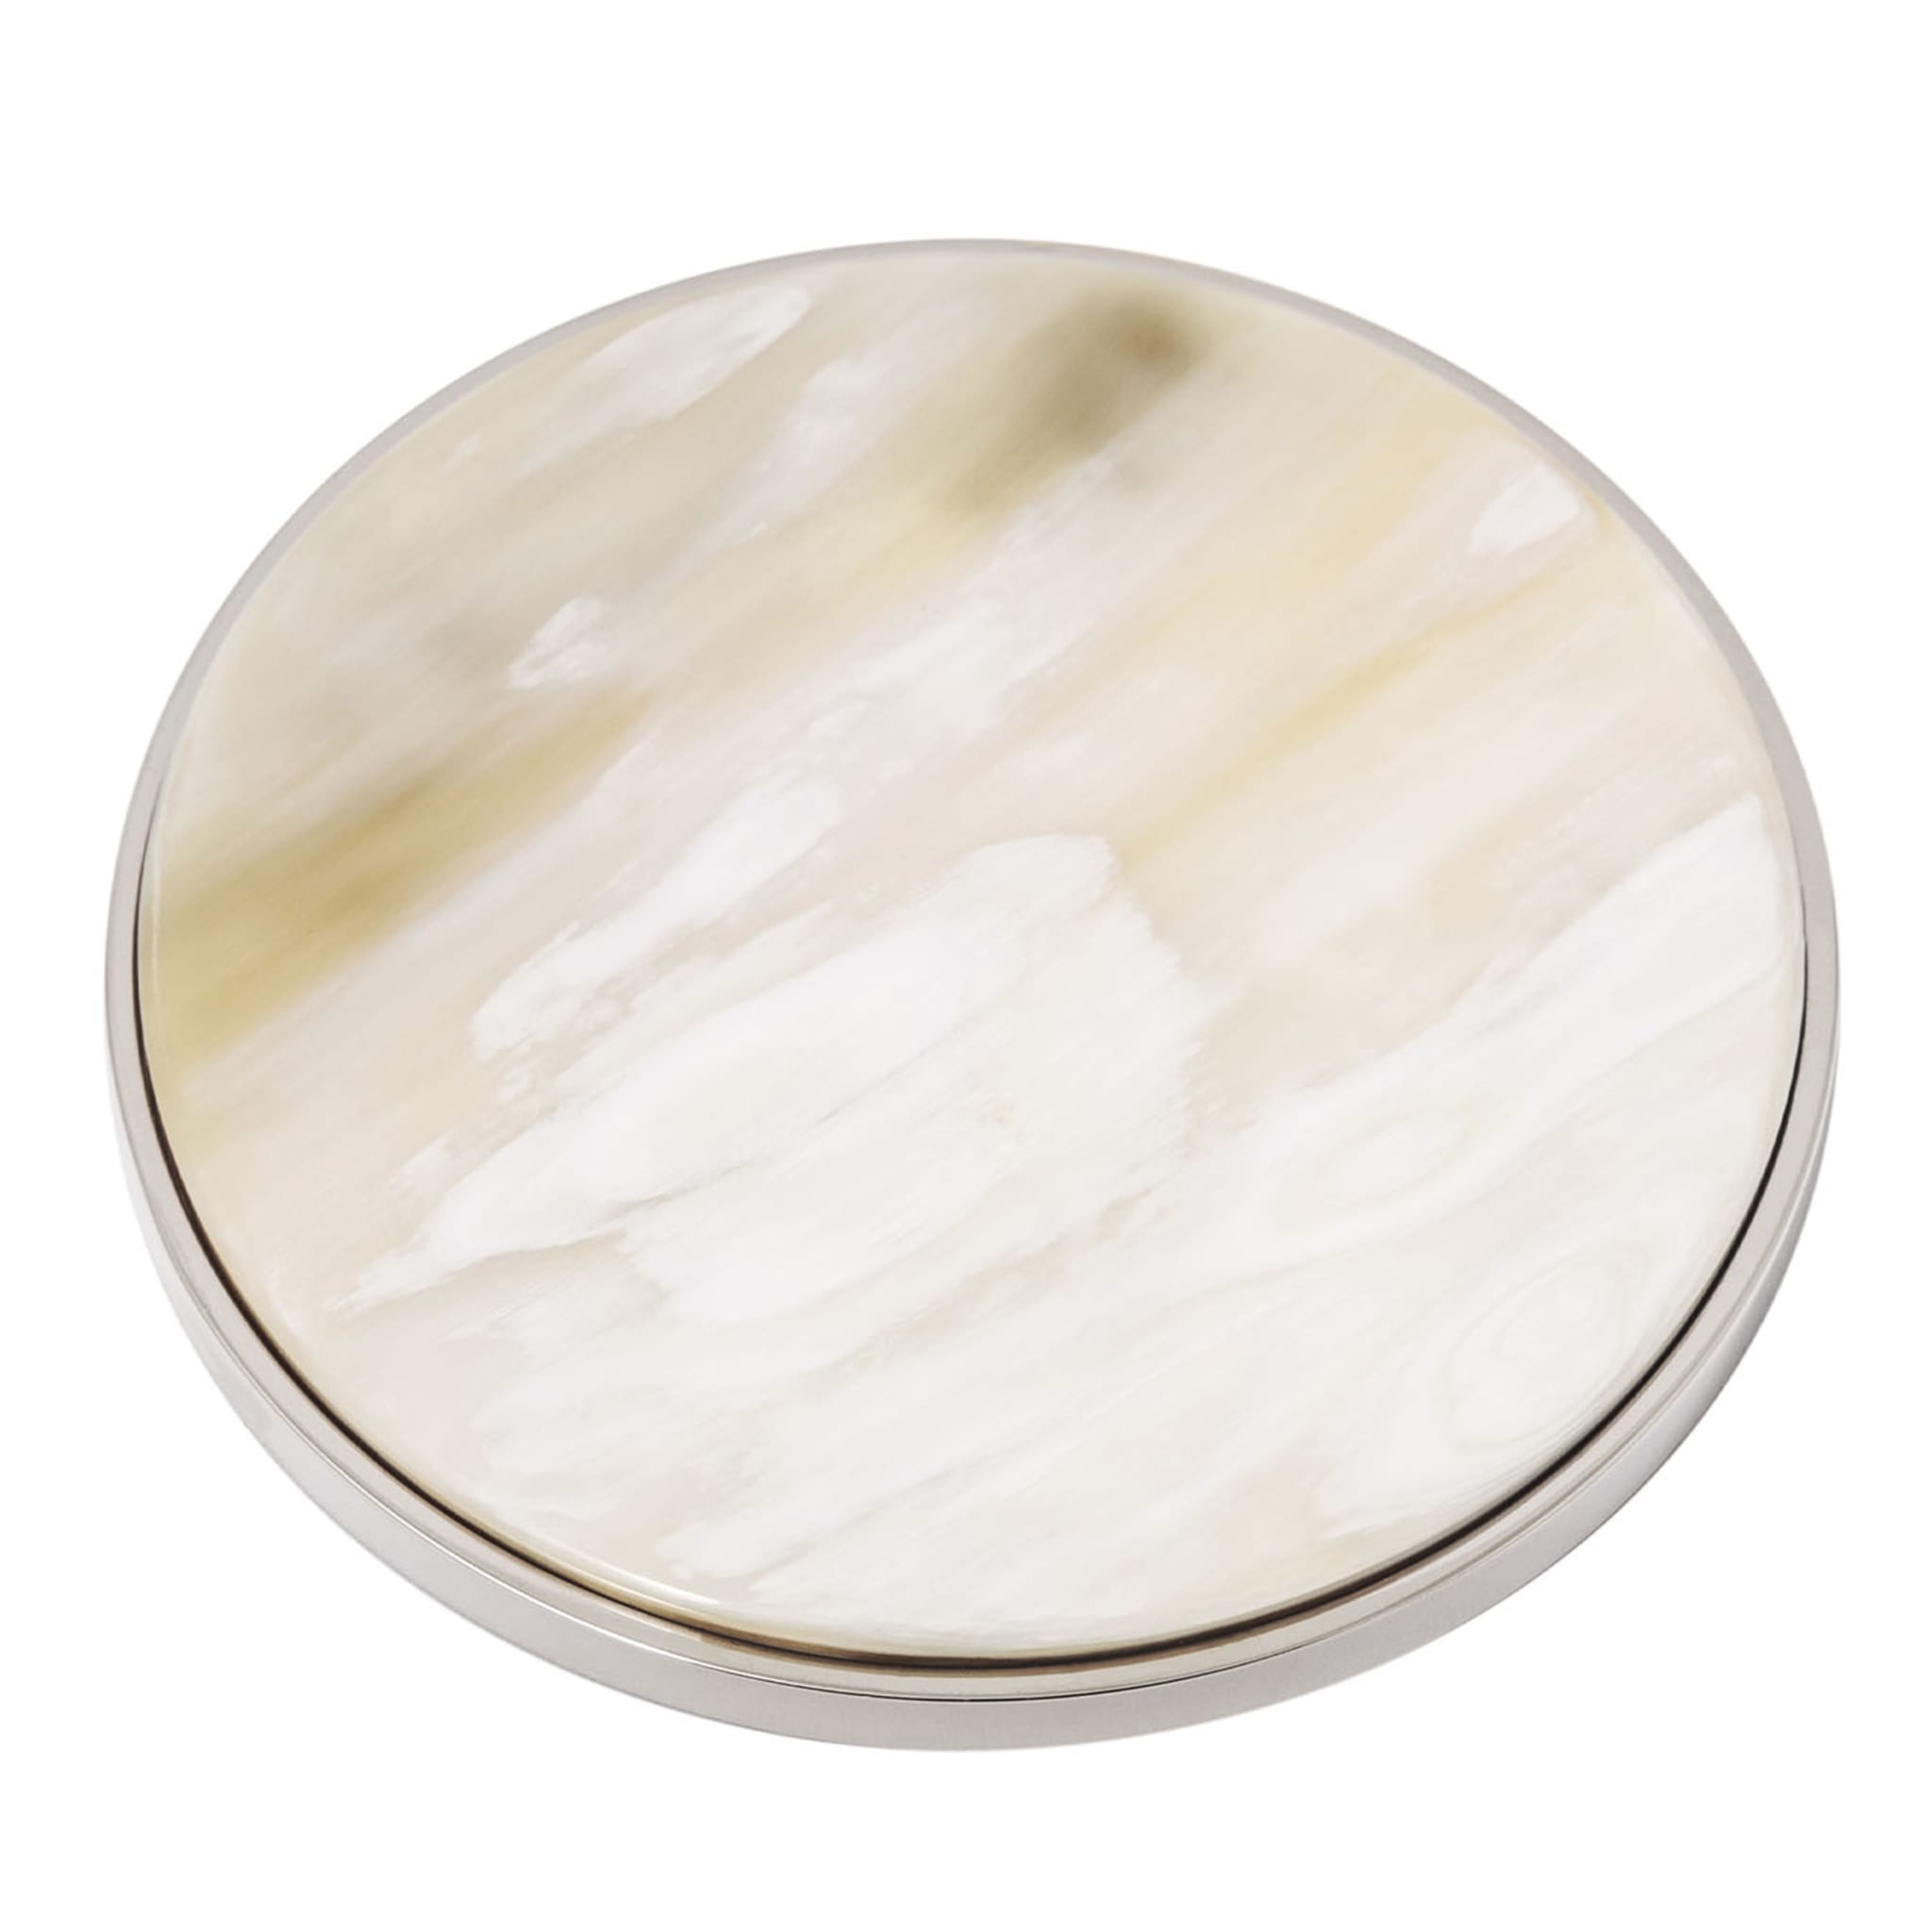 Natural White Blond Horn Coasters 6 pcs  - Main view